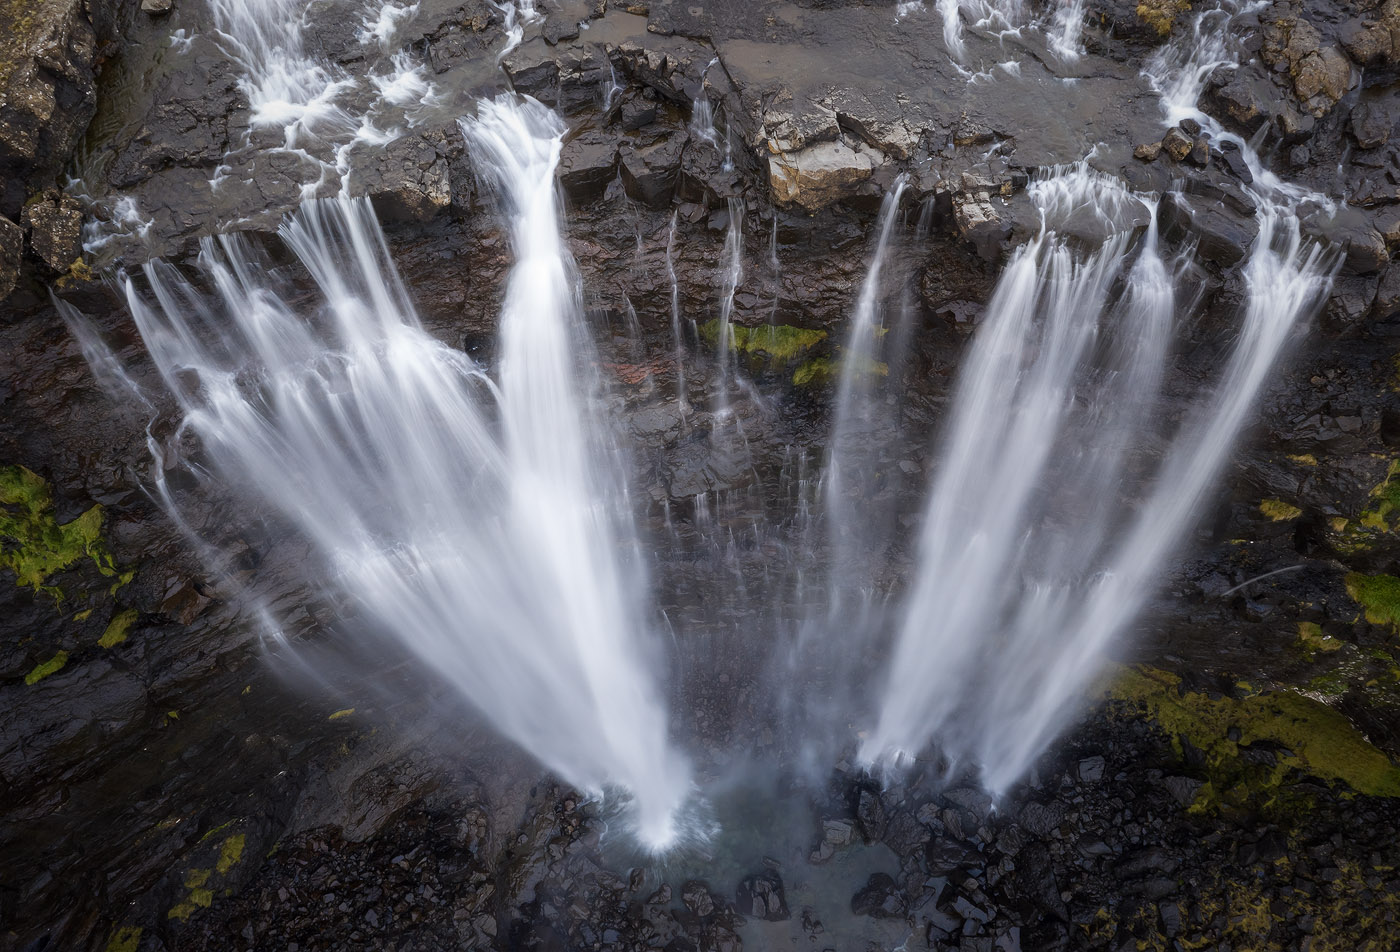 A long exposure of Fossa waterfall, Faroe Islands. If I had an ND filter handy, I could've extended the exposure even more. </br>DJI Mavic II Pro, 1/2 sec, F11, ISO 100.